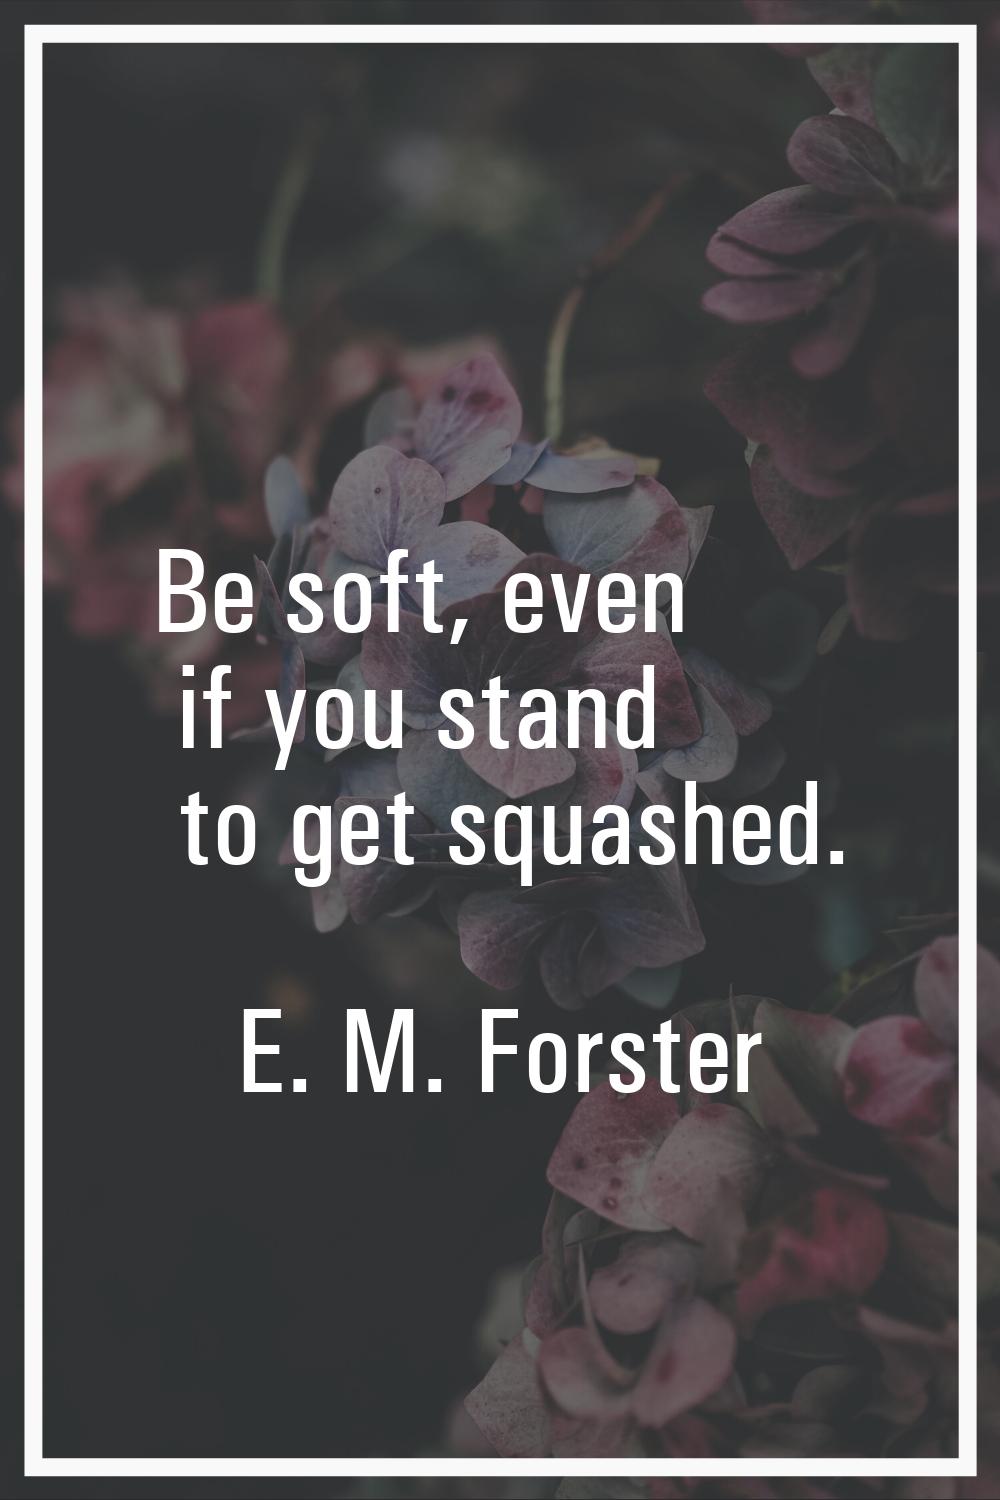 Be soft, even if you stand to get squashed.